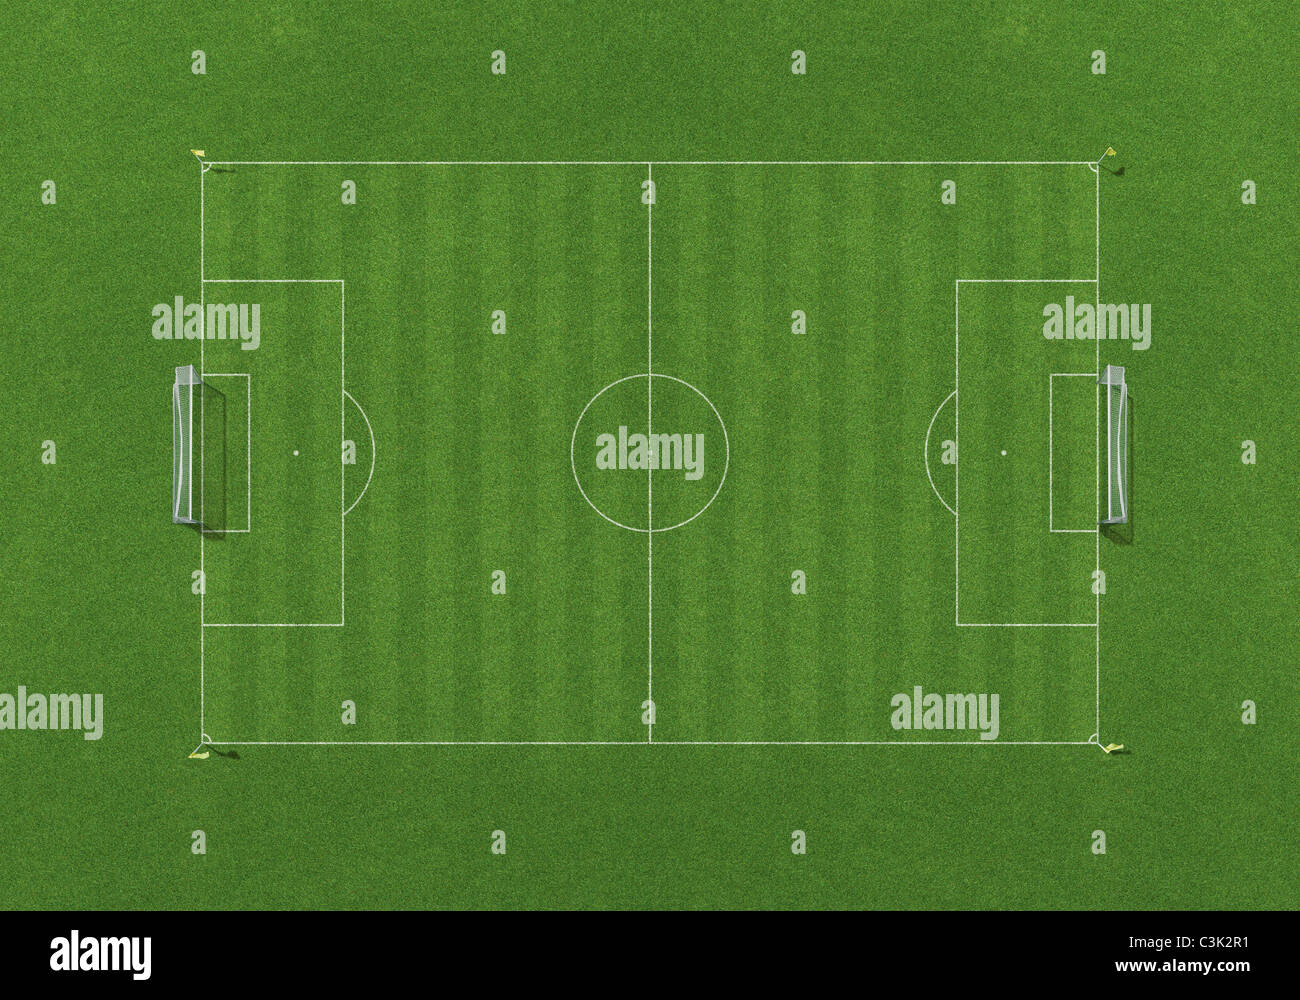 Soccer field, overhead view Stock Photo